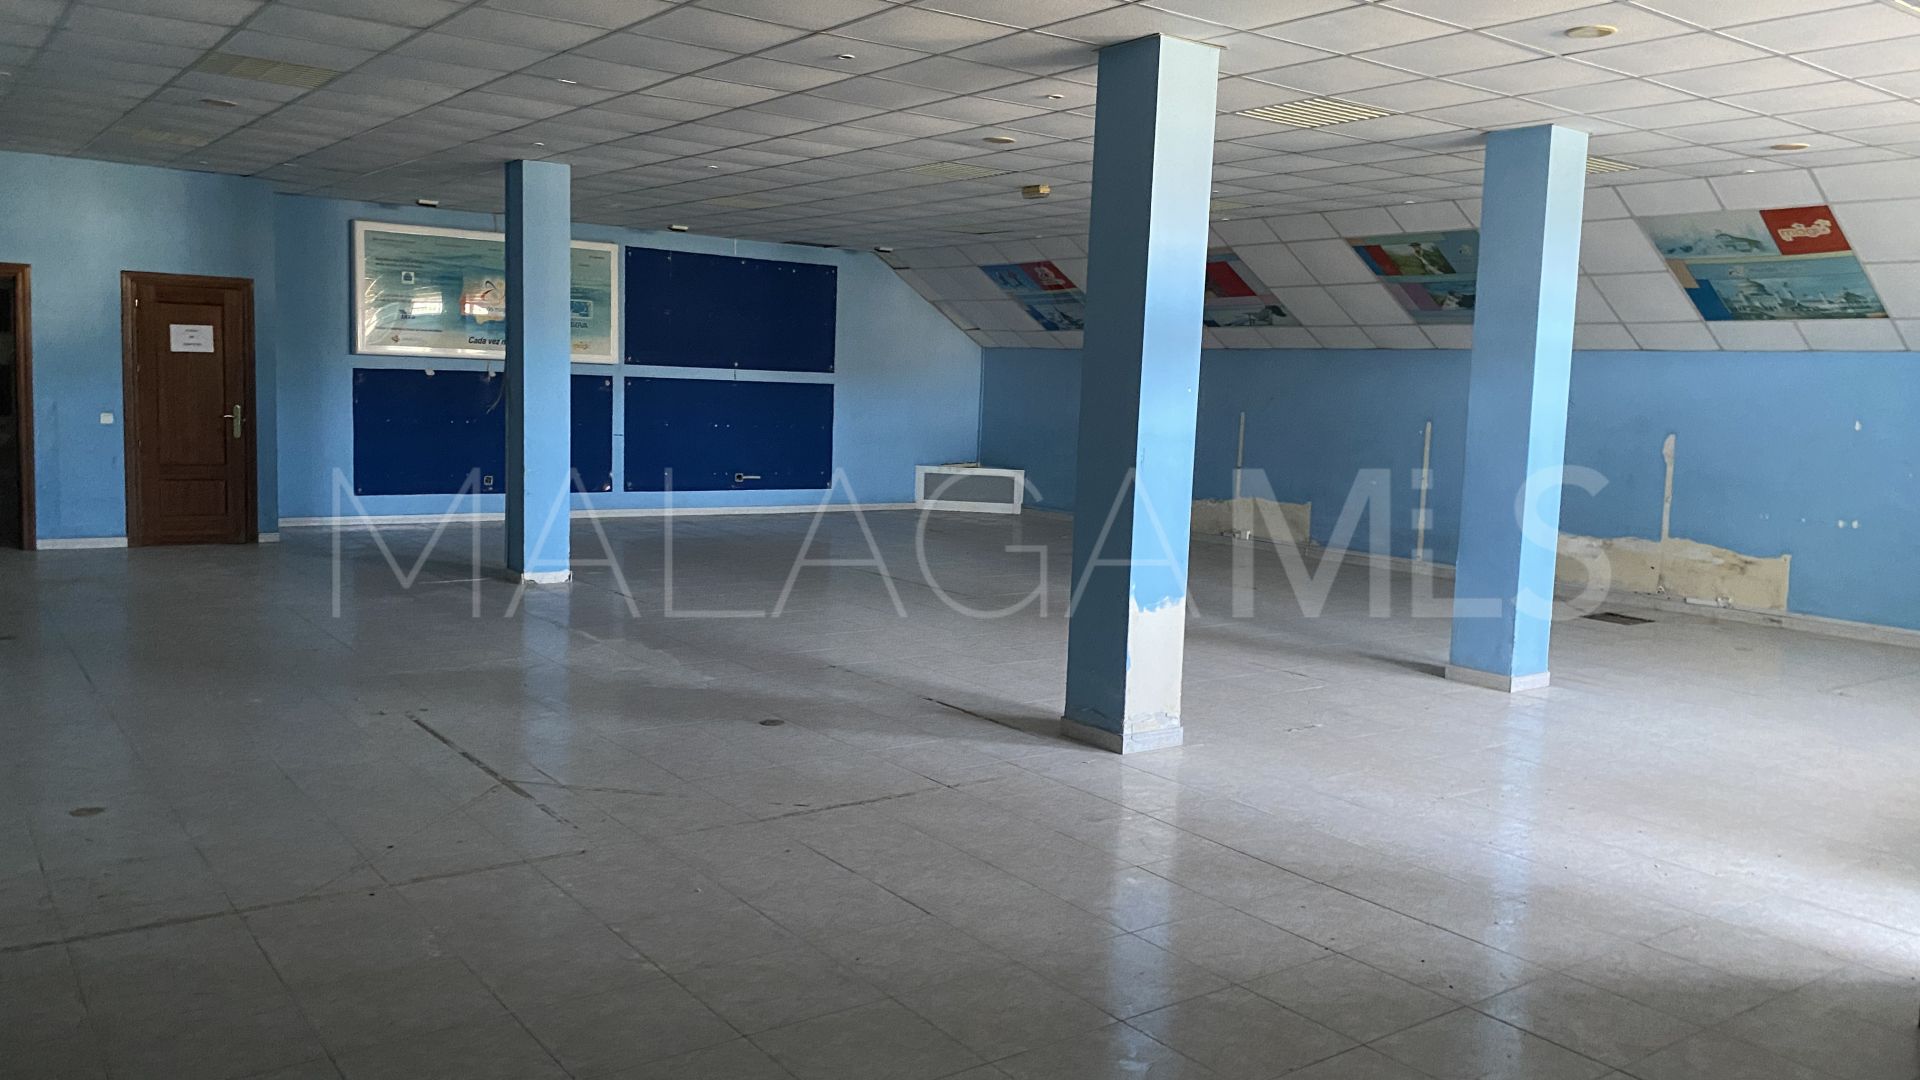 Local comercial for sale in Puerto Marina